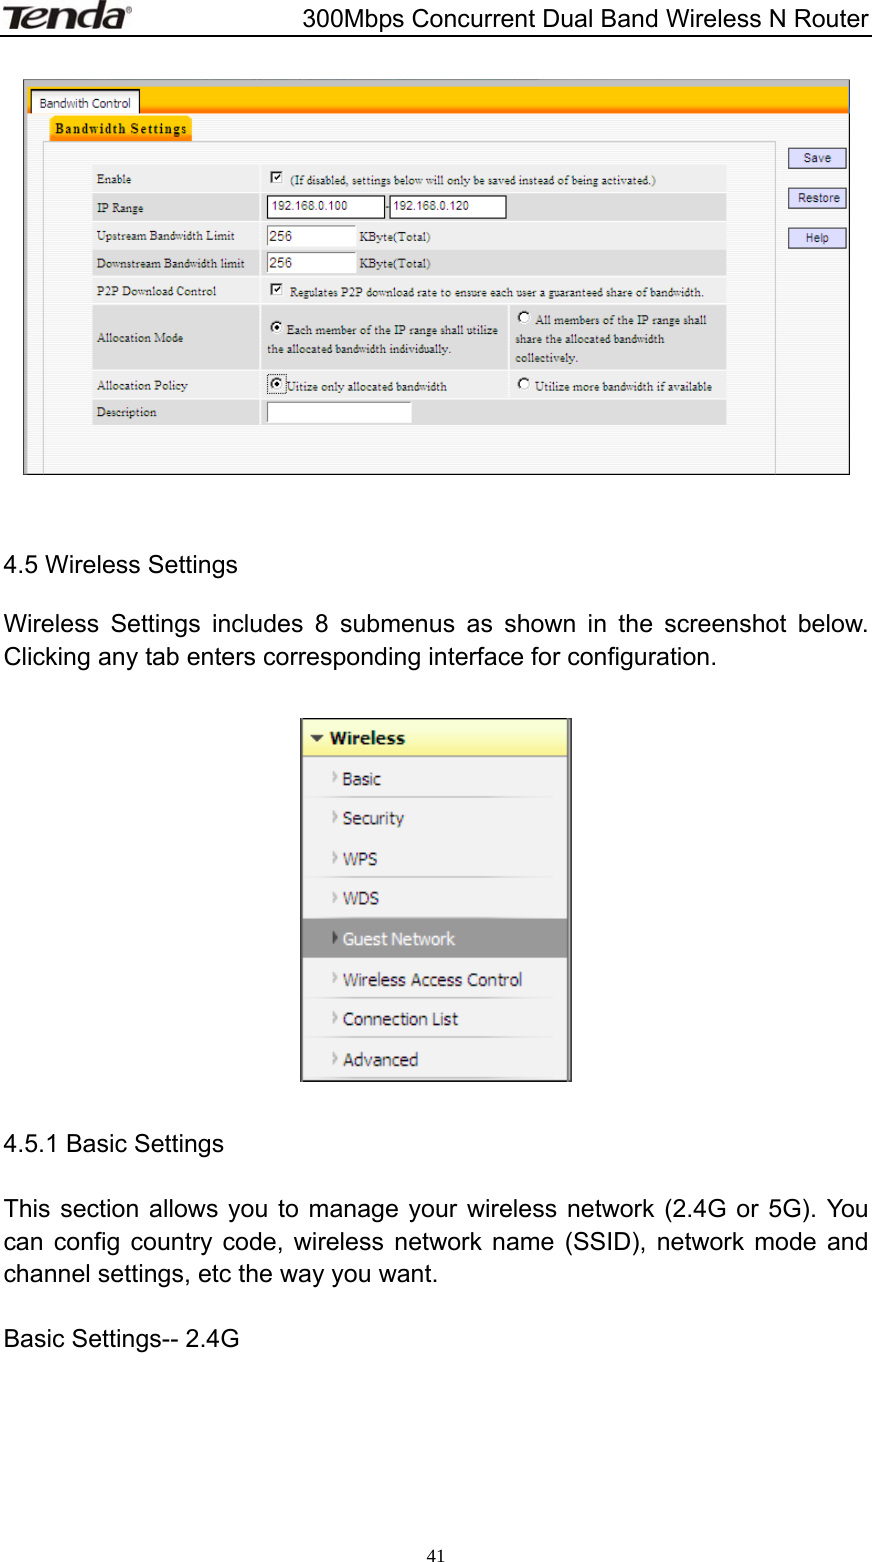                       300Mbps Concurrent Dual Band Wireless N Router  41  4.5 Wireless Settings Wireless Settings includes 8 submenus as shown in the screenshot below. Clicking any tab enters corresponding interface for configuration.    4.5.1 Basic Settings  This section allows you to manage your wireless network (2.4G or 5G). You can config country code, wireless network name (SSID), network mode and channel settings, etc the way you want.  Basic Settings-- 2.4G   